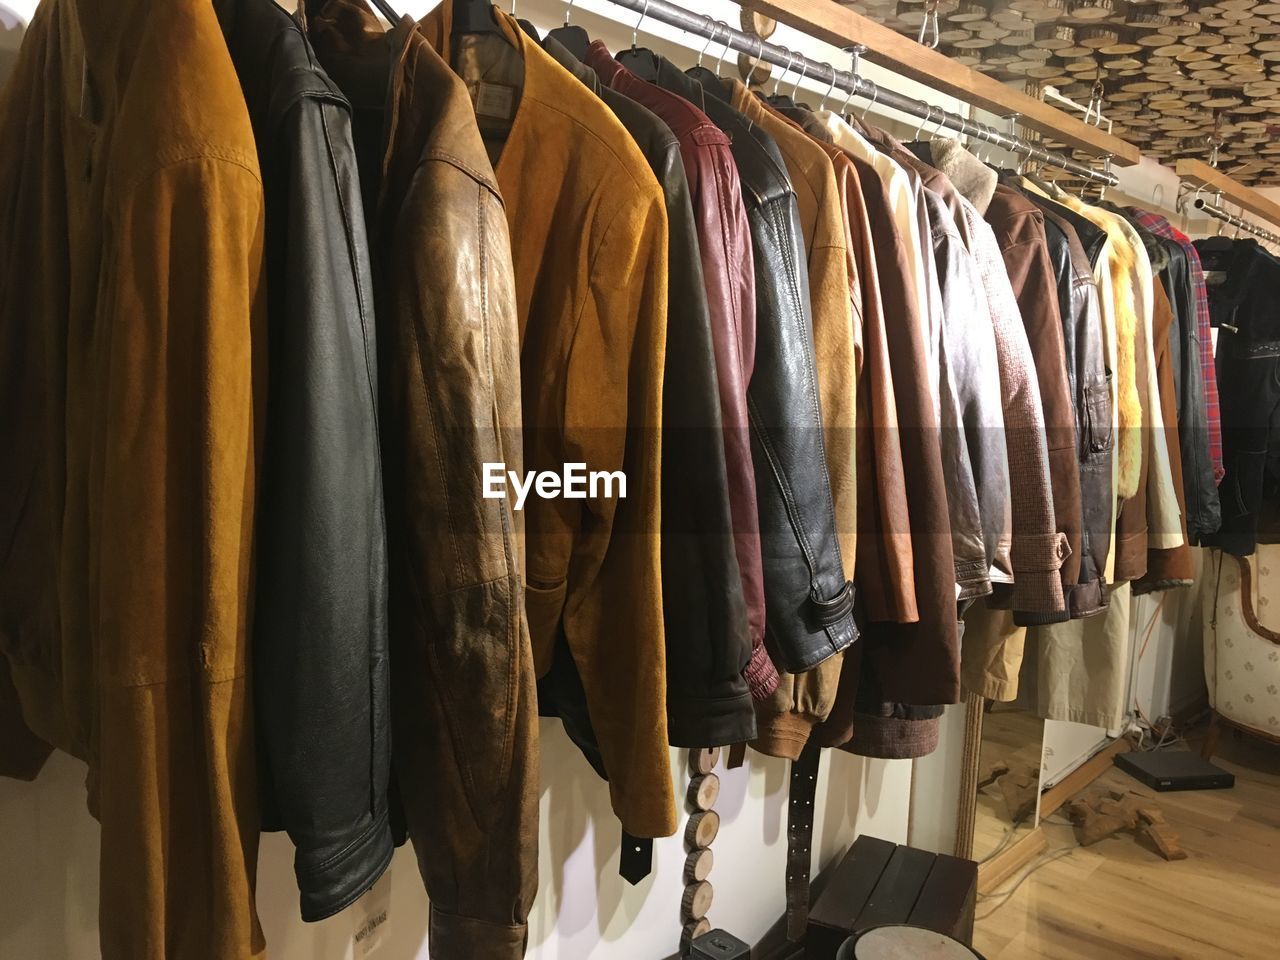 Jackets hanging on rack in store